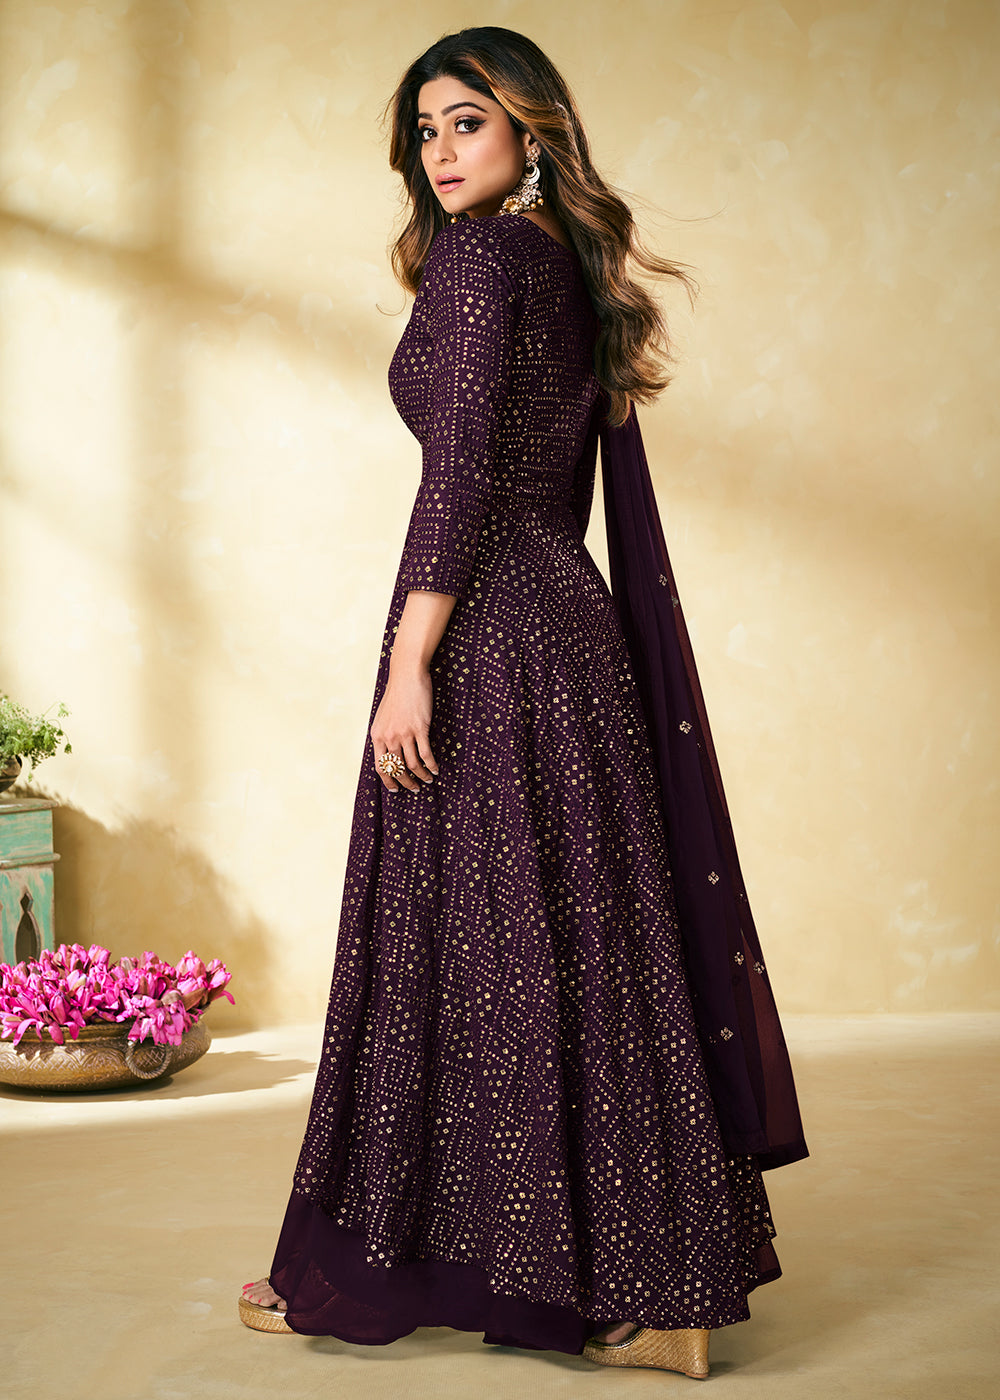 Buy Purple Indian Designer Suit - Embroidered Palazzo Suit